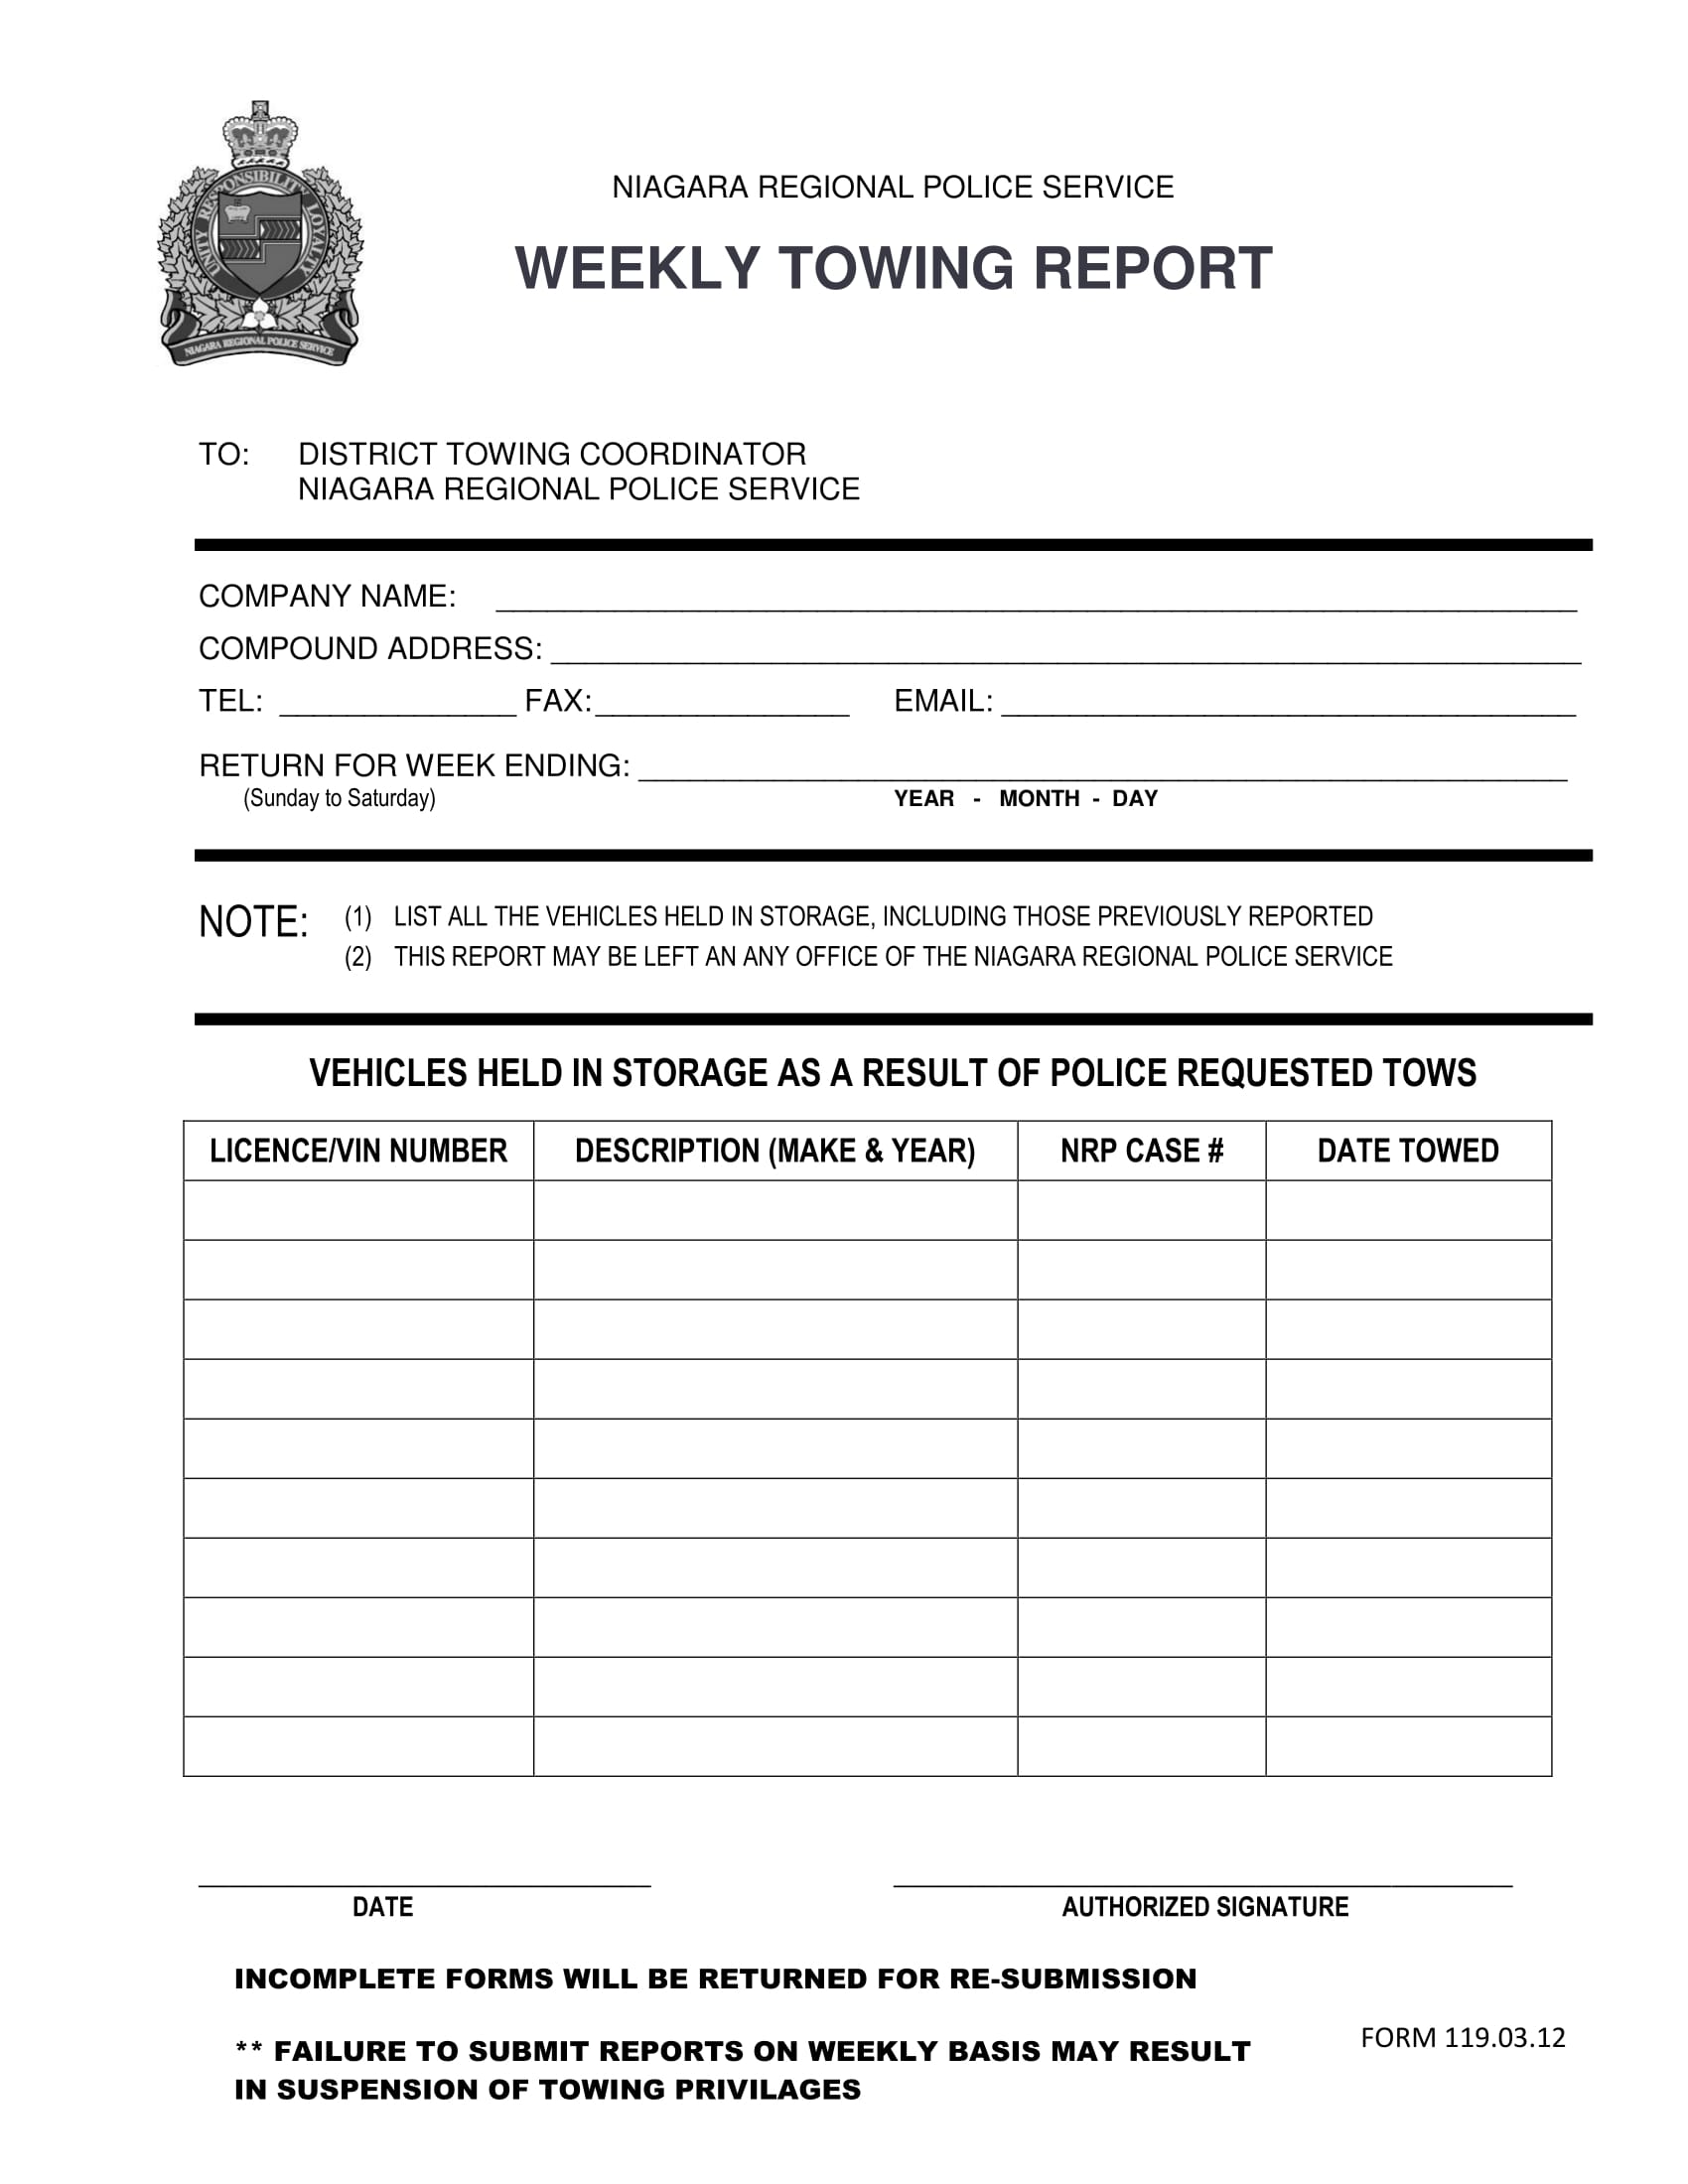 weekly towing report form 1